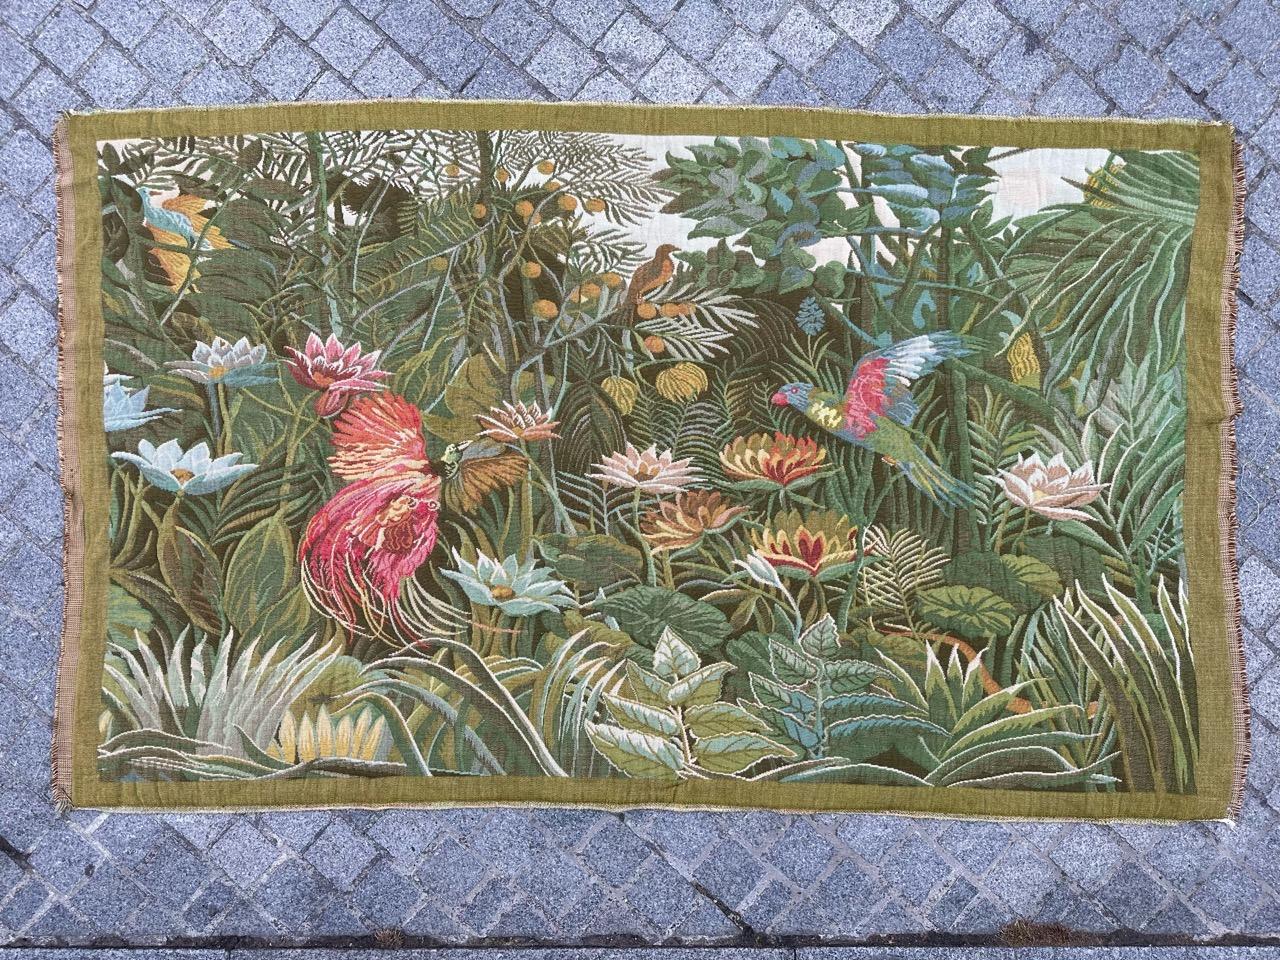 Exquisite Mid-Century French Tapestry by Henri Rousseau

Discover the timeless beauty of this mid-century French tapestry featuring the renowned artist Henri Rousseau's 